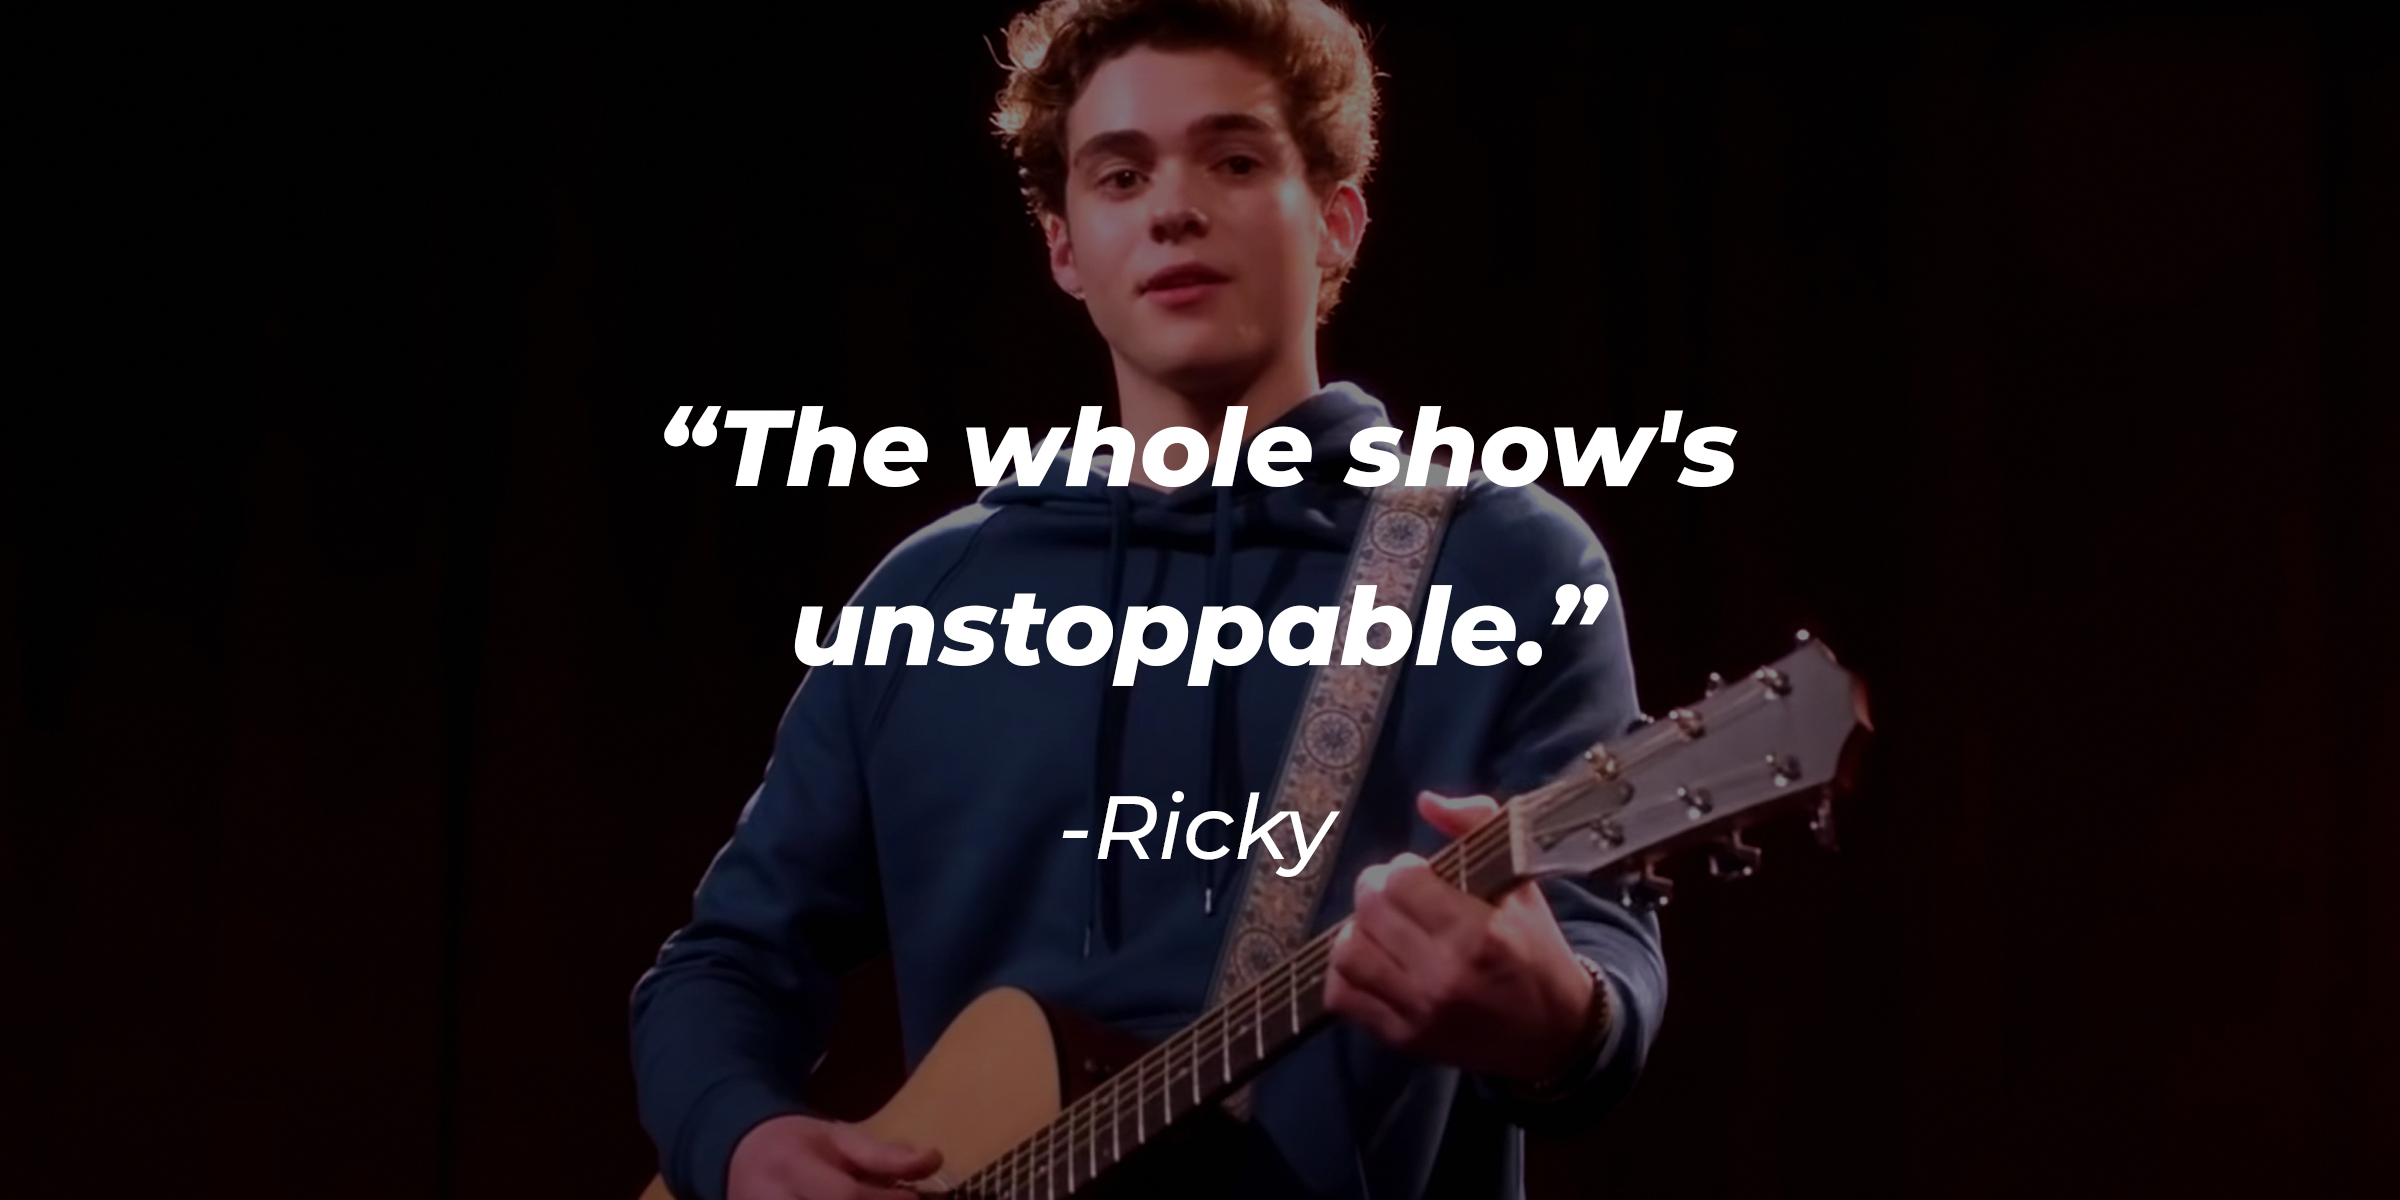 Ricky from "High School Musical: The Musical: The Series," with his quote: "The whole show's unstoppable." | Source: Youtube.com/DisneyMusicVEVO